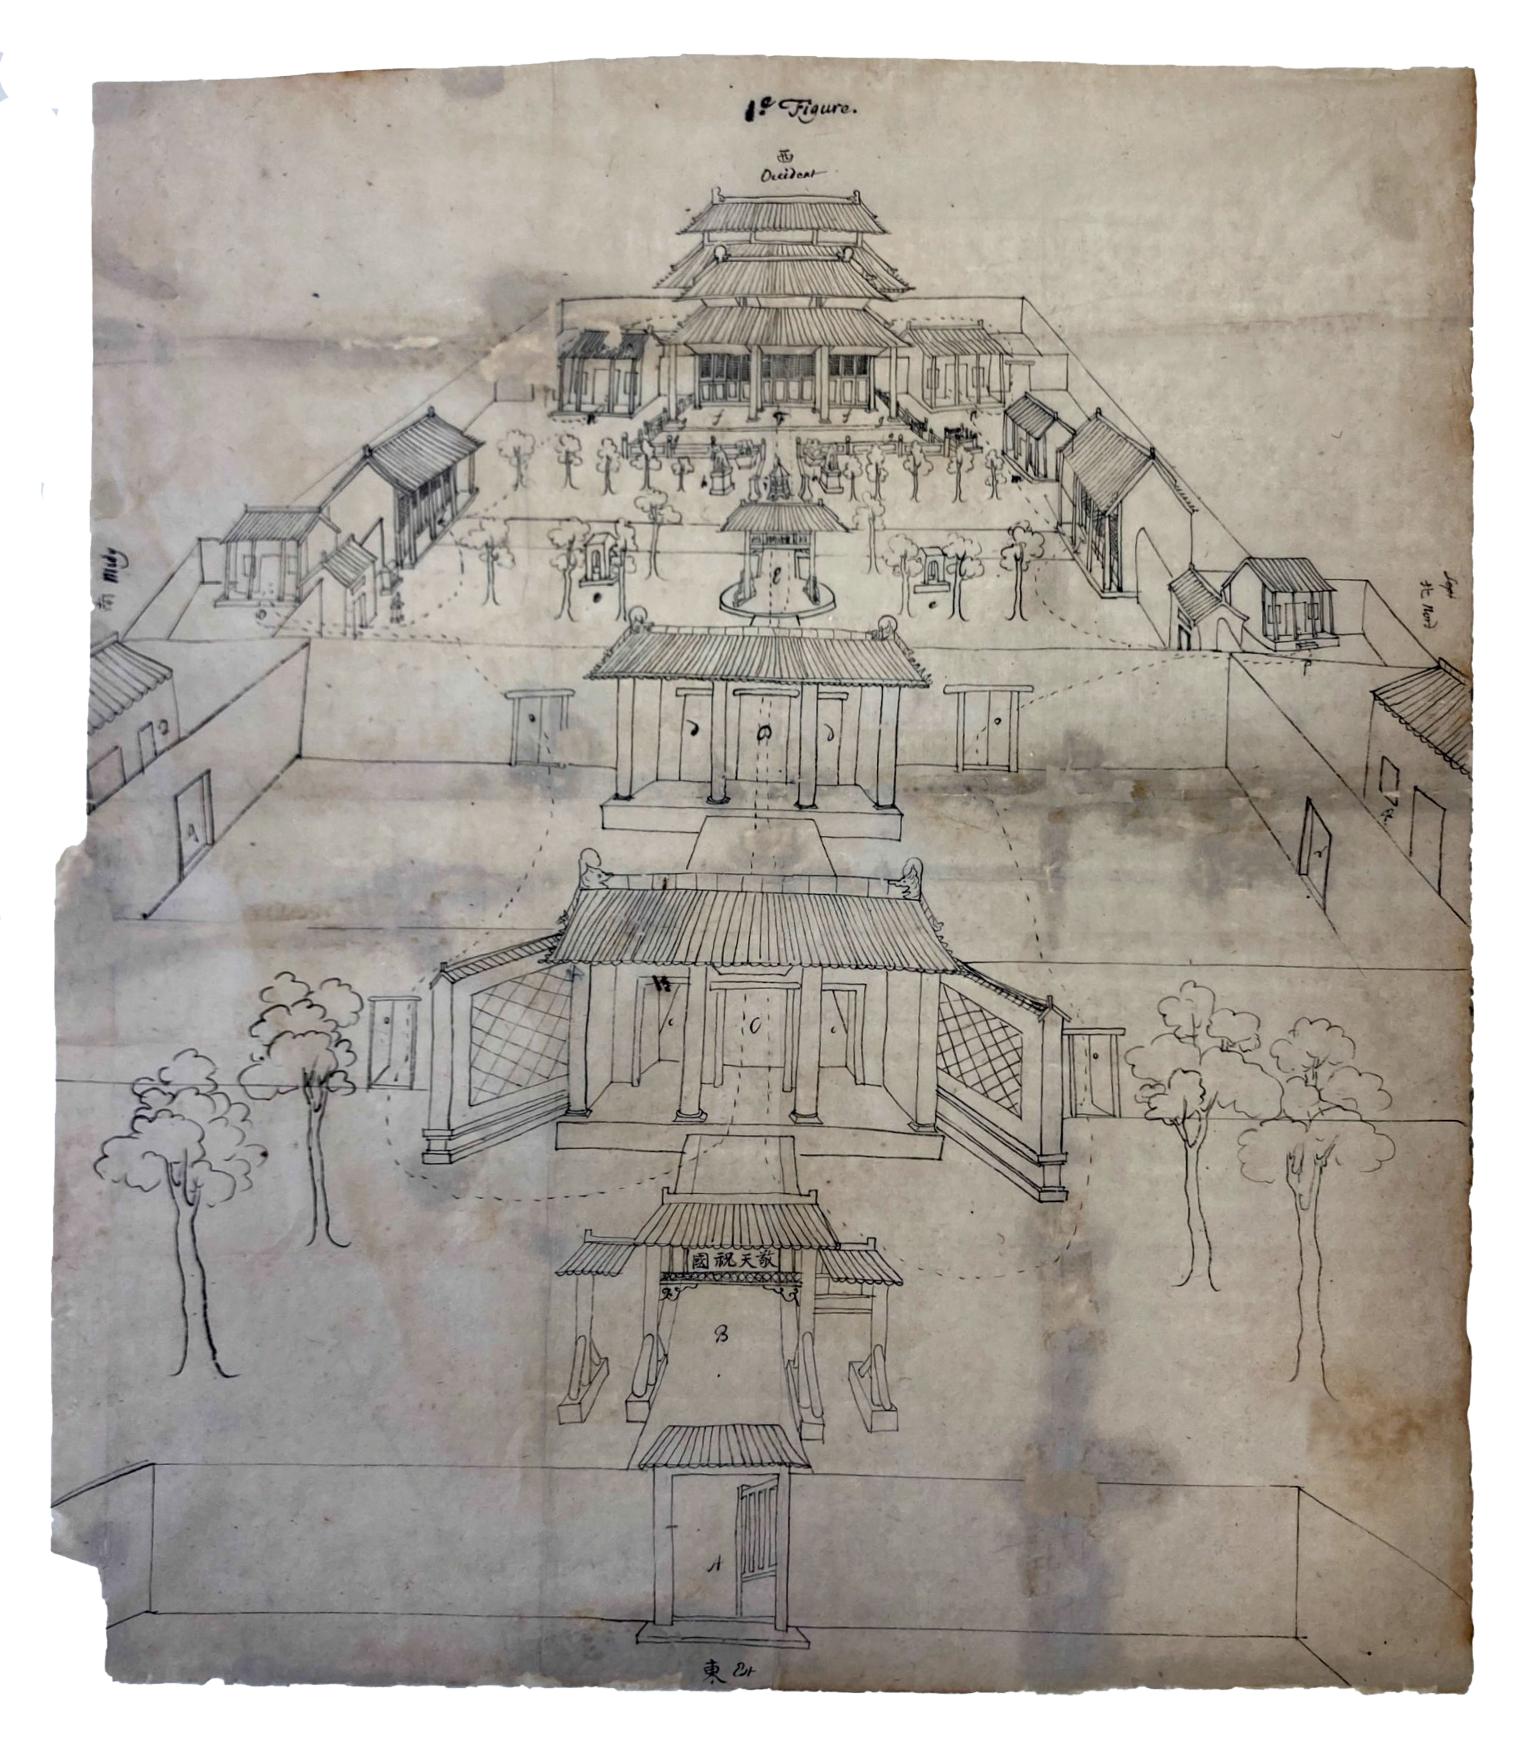 Manuscript page with drawing of building complex with inner courtyards.